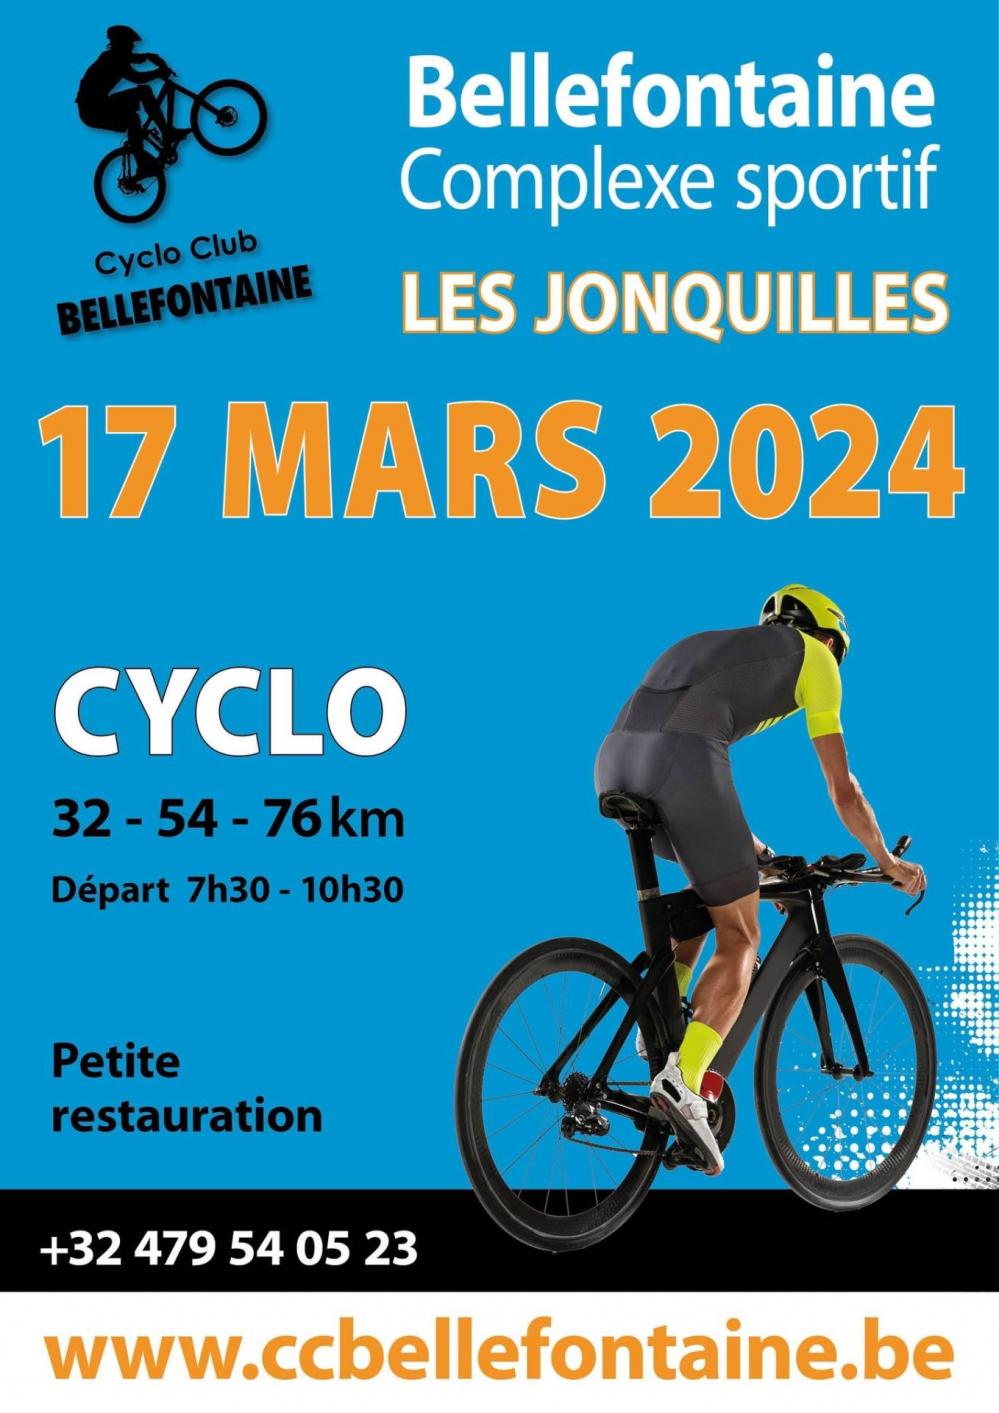 Cyclo a bellefontaine le 170324